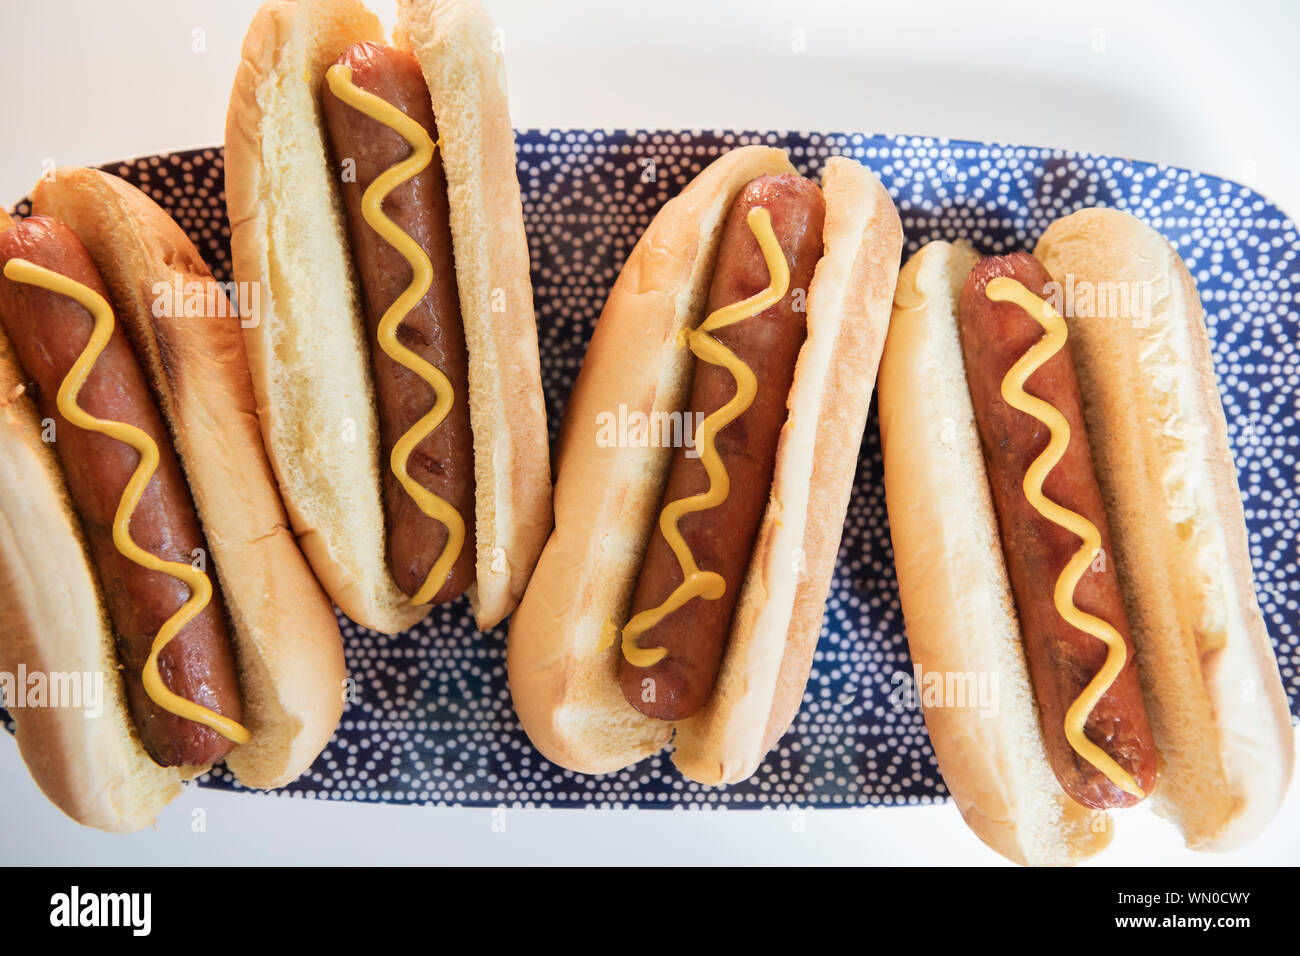 Hot dogs on tray Stock Photo